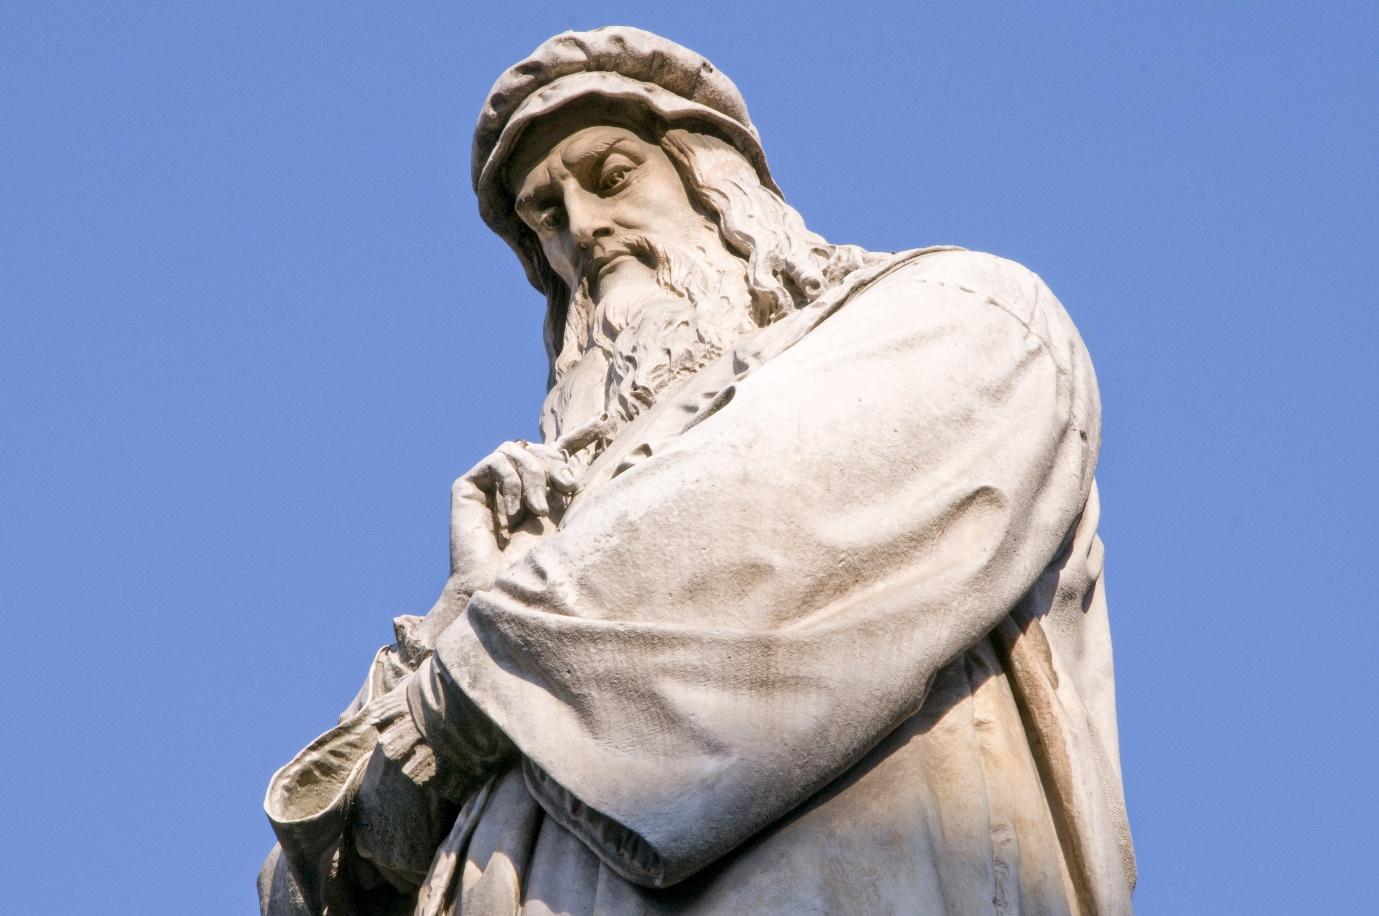 A statue of a person with a beard

Description automatically generated